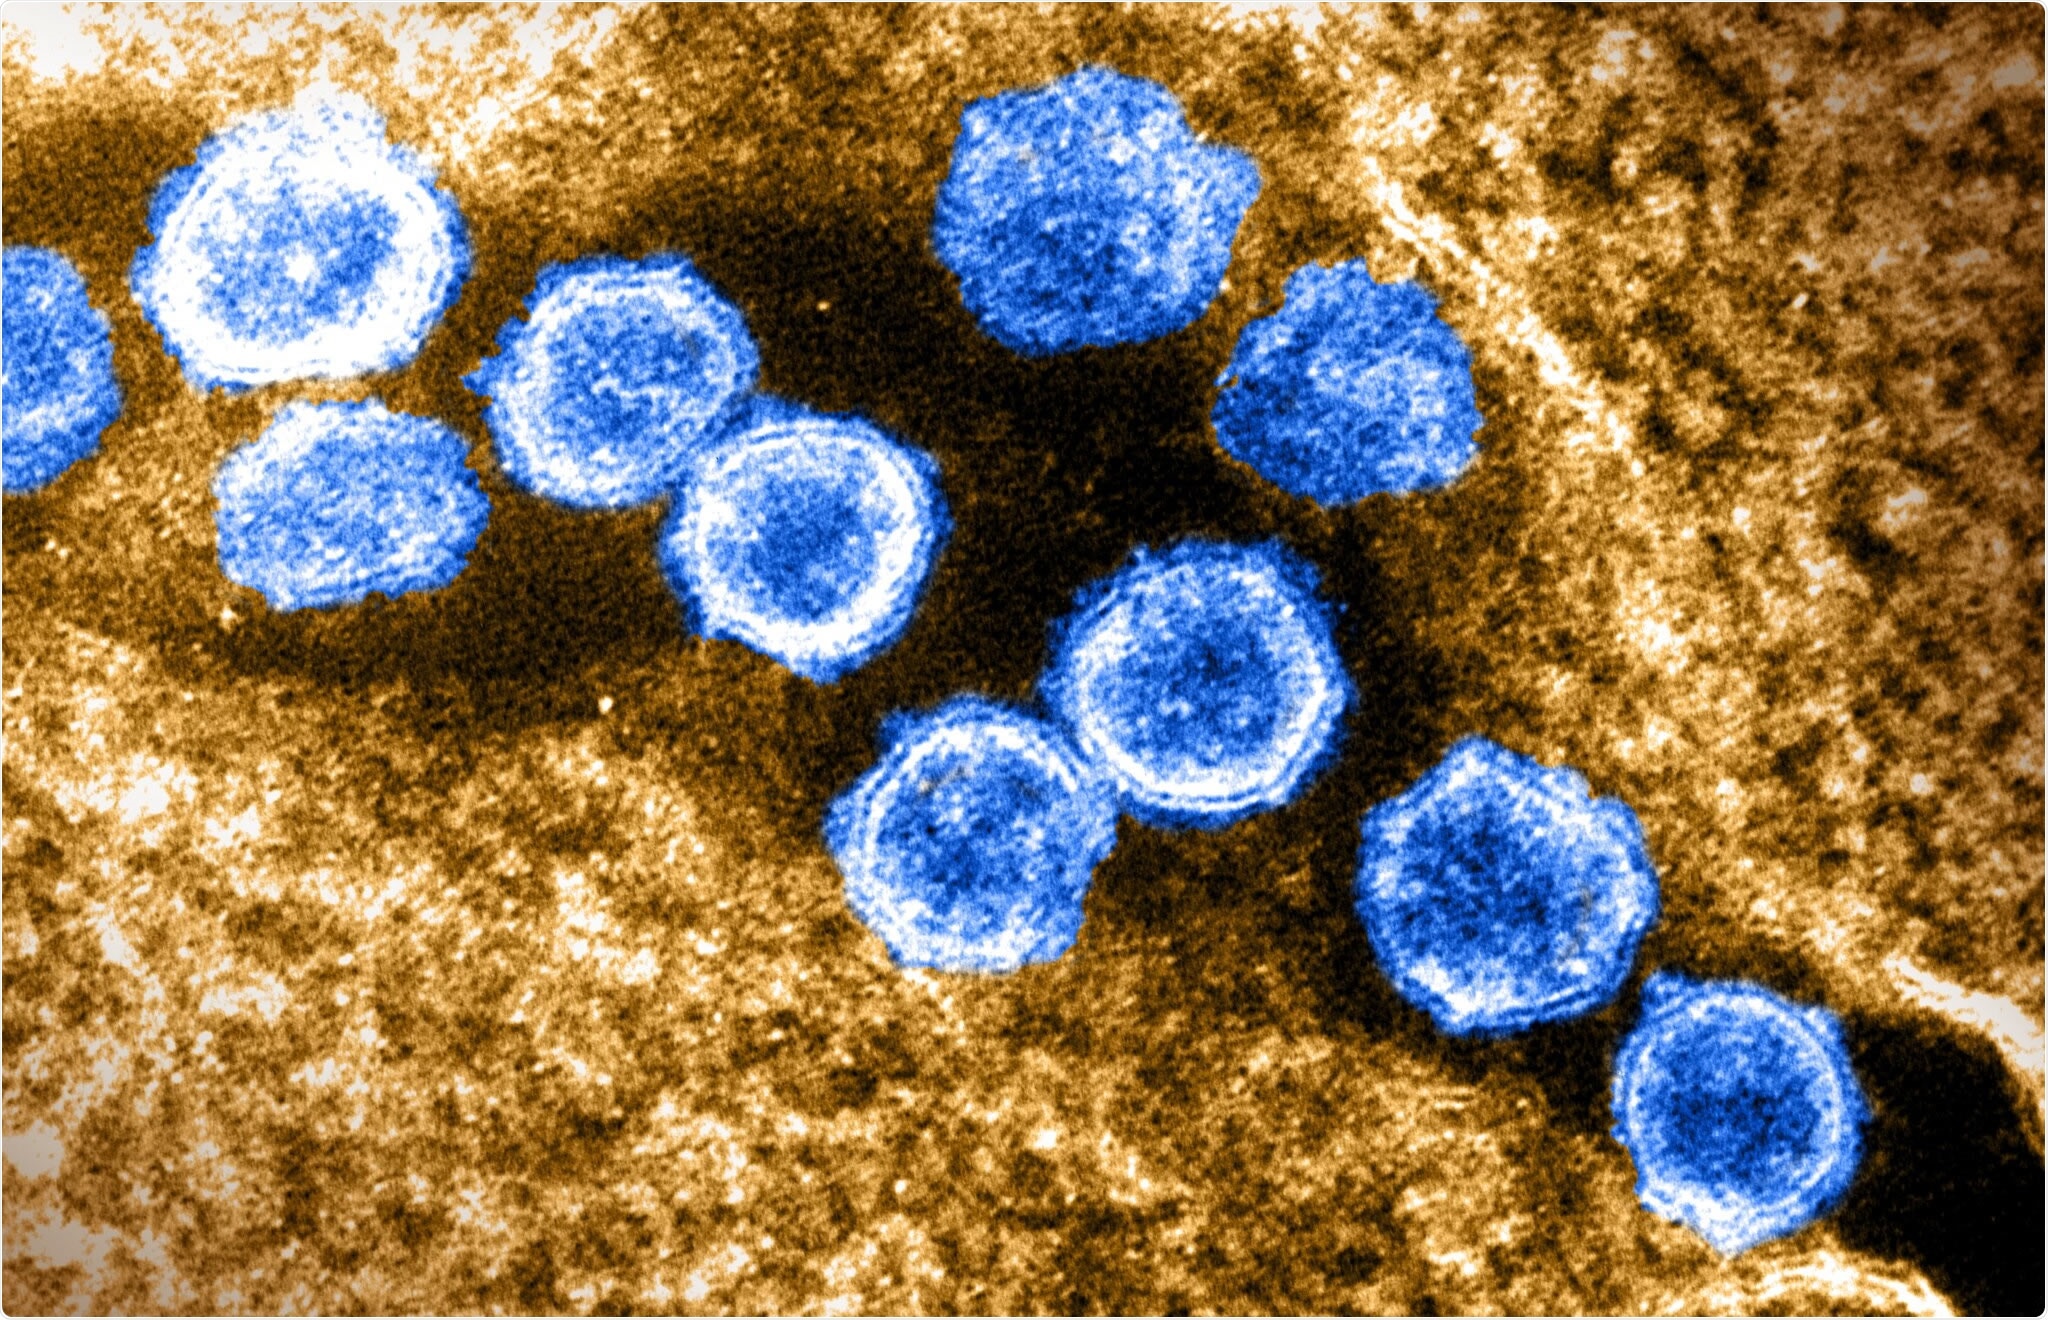 Study: Immunogenicity of COVID-19 Vaccination in Immunocompromised Patients: An Observational, Prospective Cohort Study Interim Analysis. Image Credit: NIAID